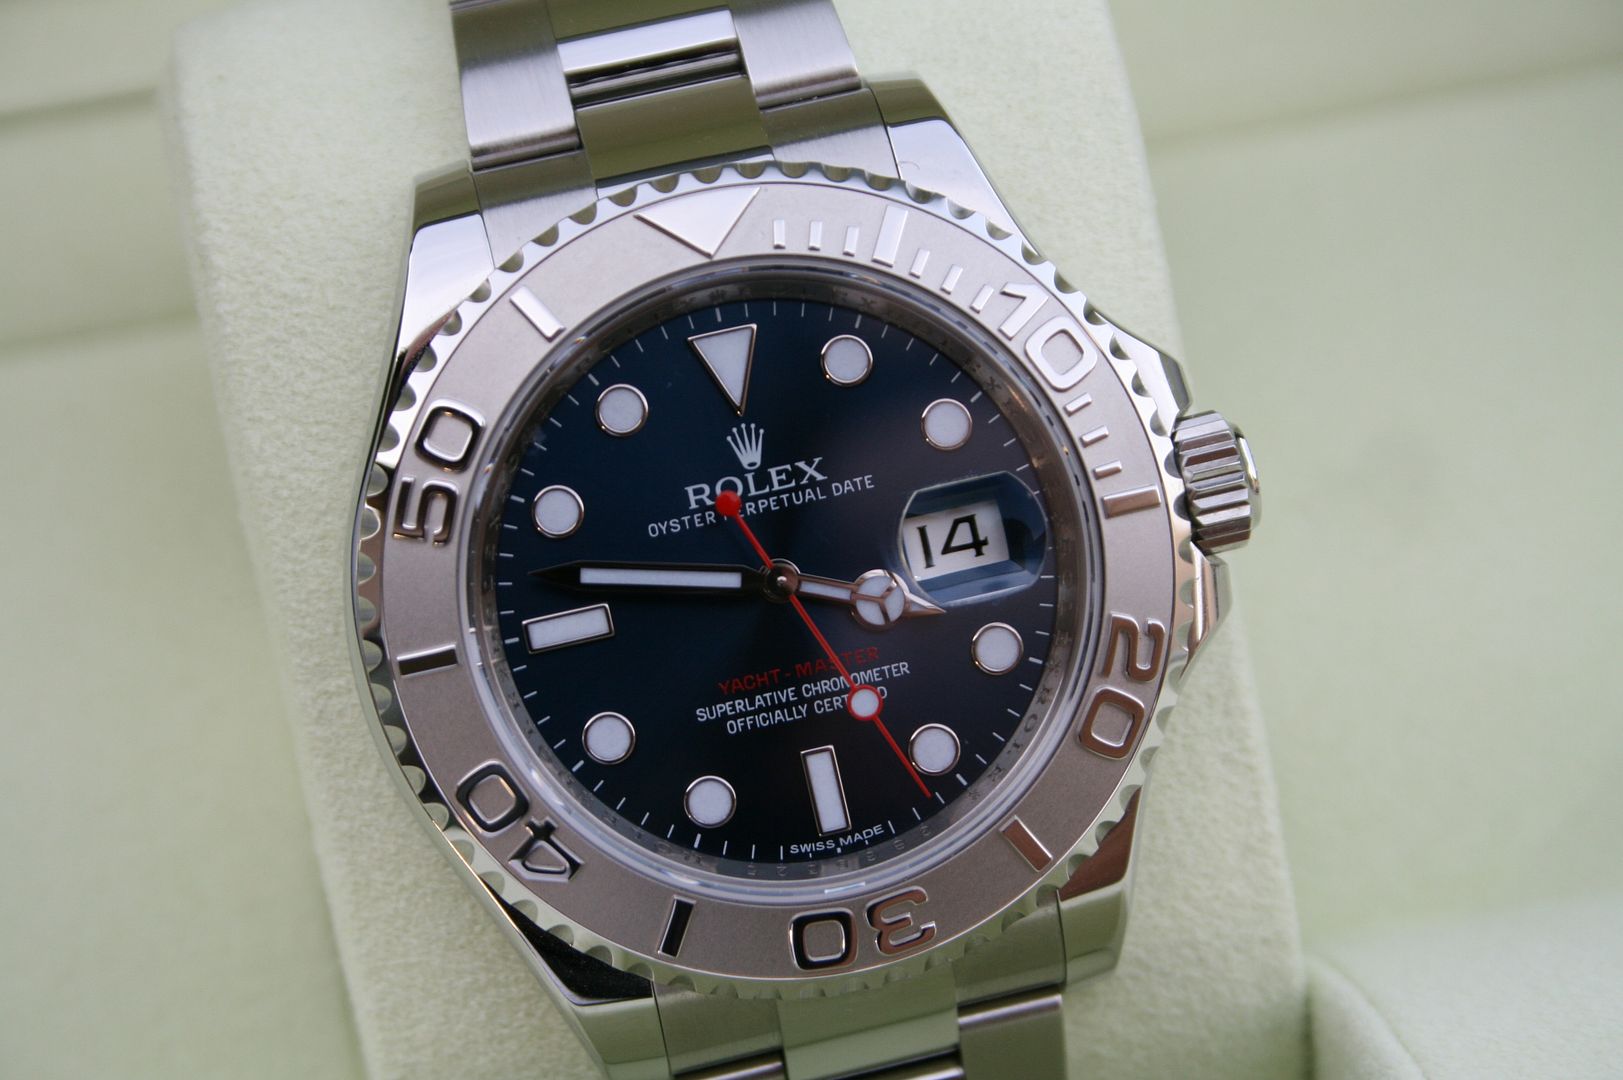 FS: Rolex 116622 Blue Dial Yachtmaster New Model Priced to SELL - Rolex ...